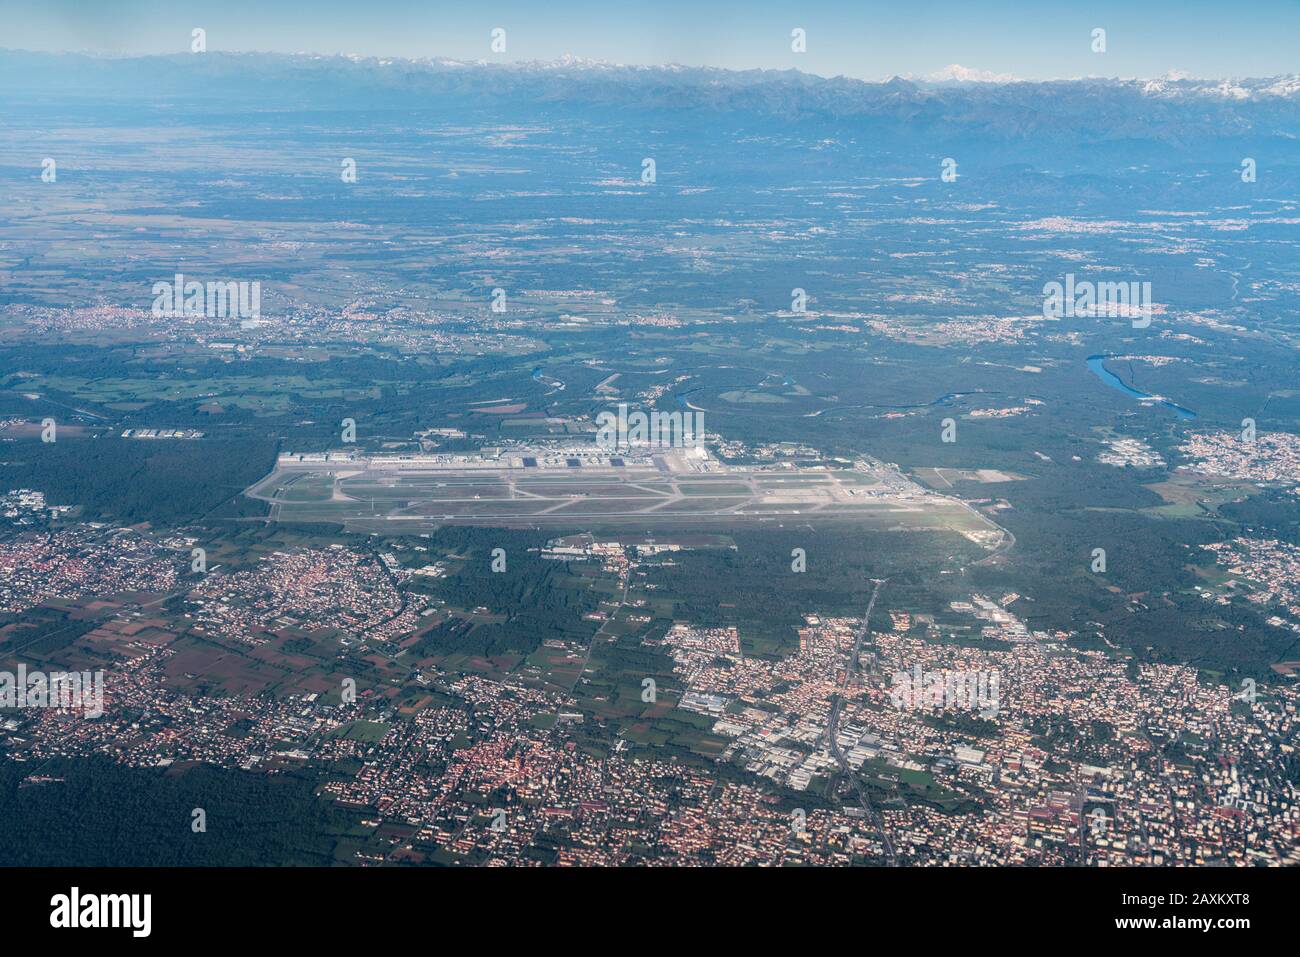 Malpensa airport seen from airplane, Milan, Lombardy, Italy Stock Photo